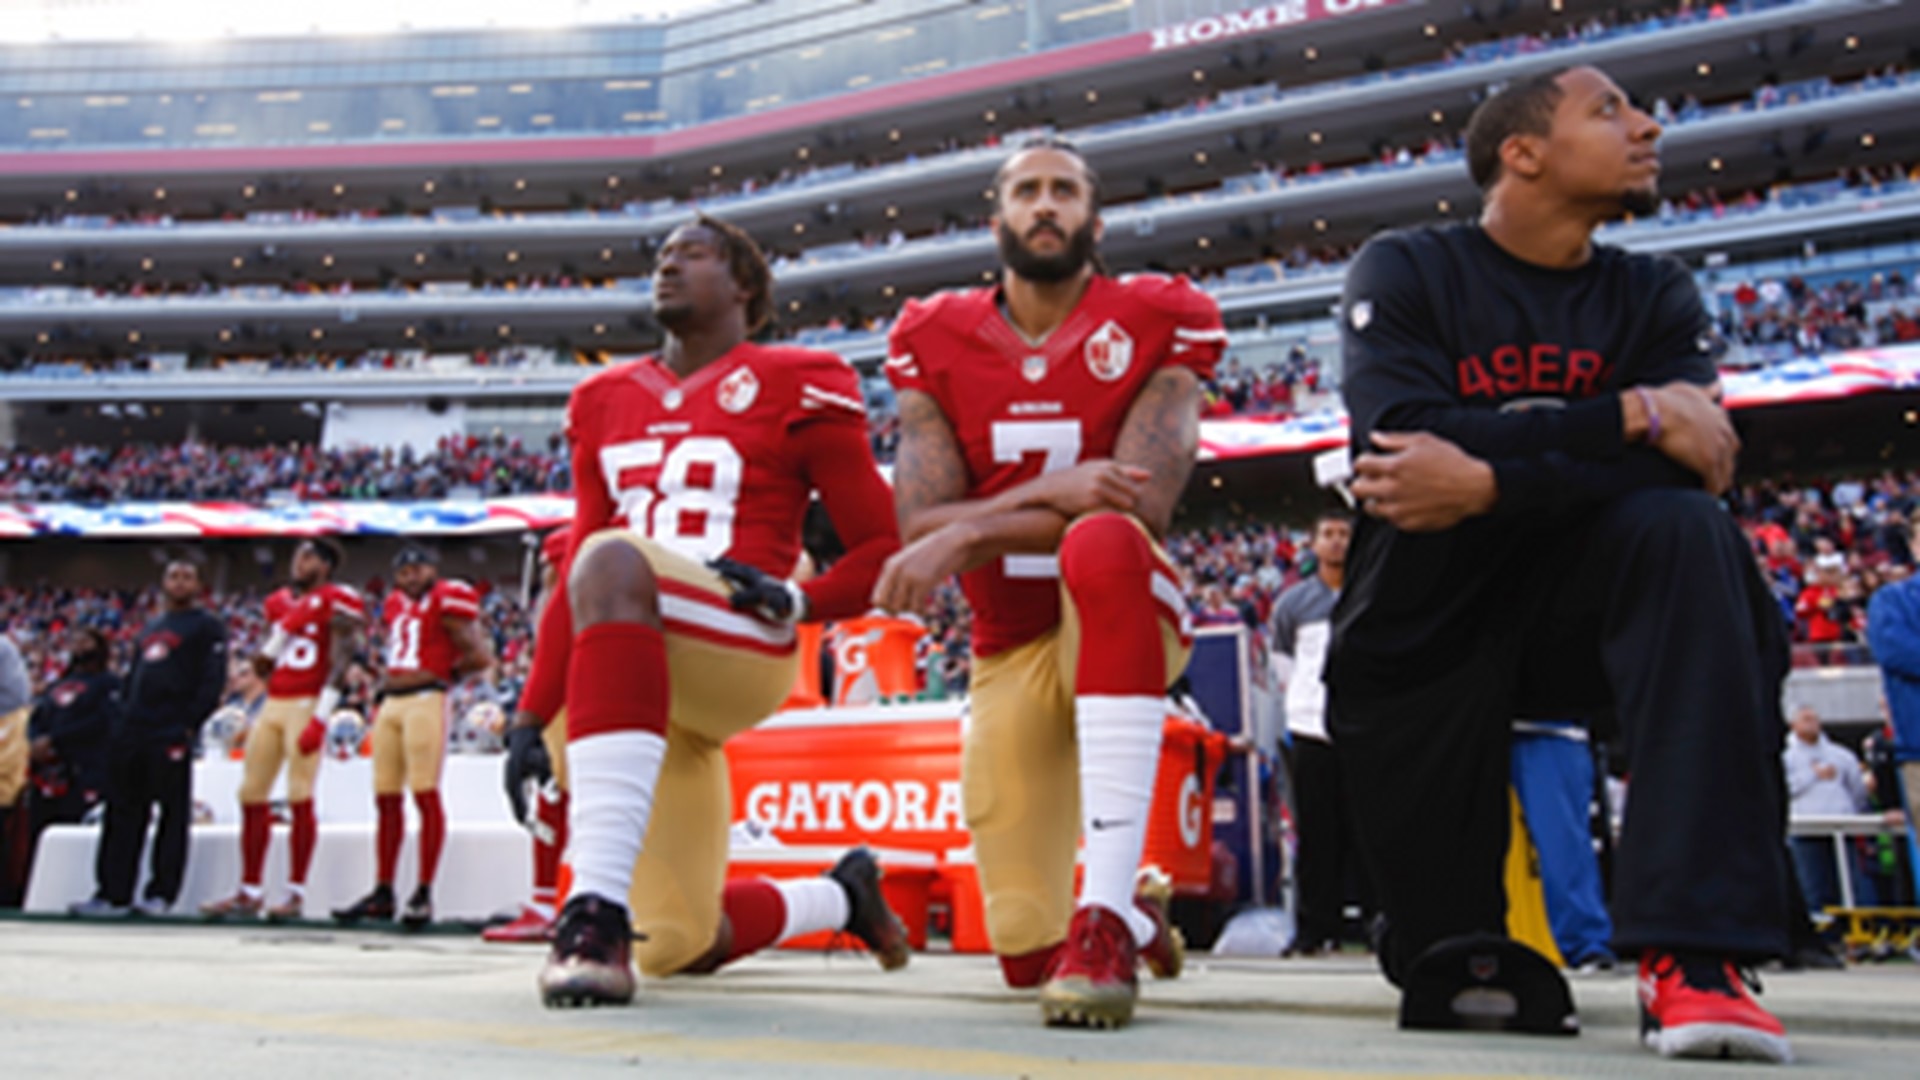 Colin Kaepernick editing, publishing collection of police 